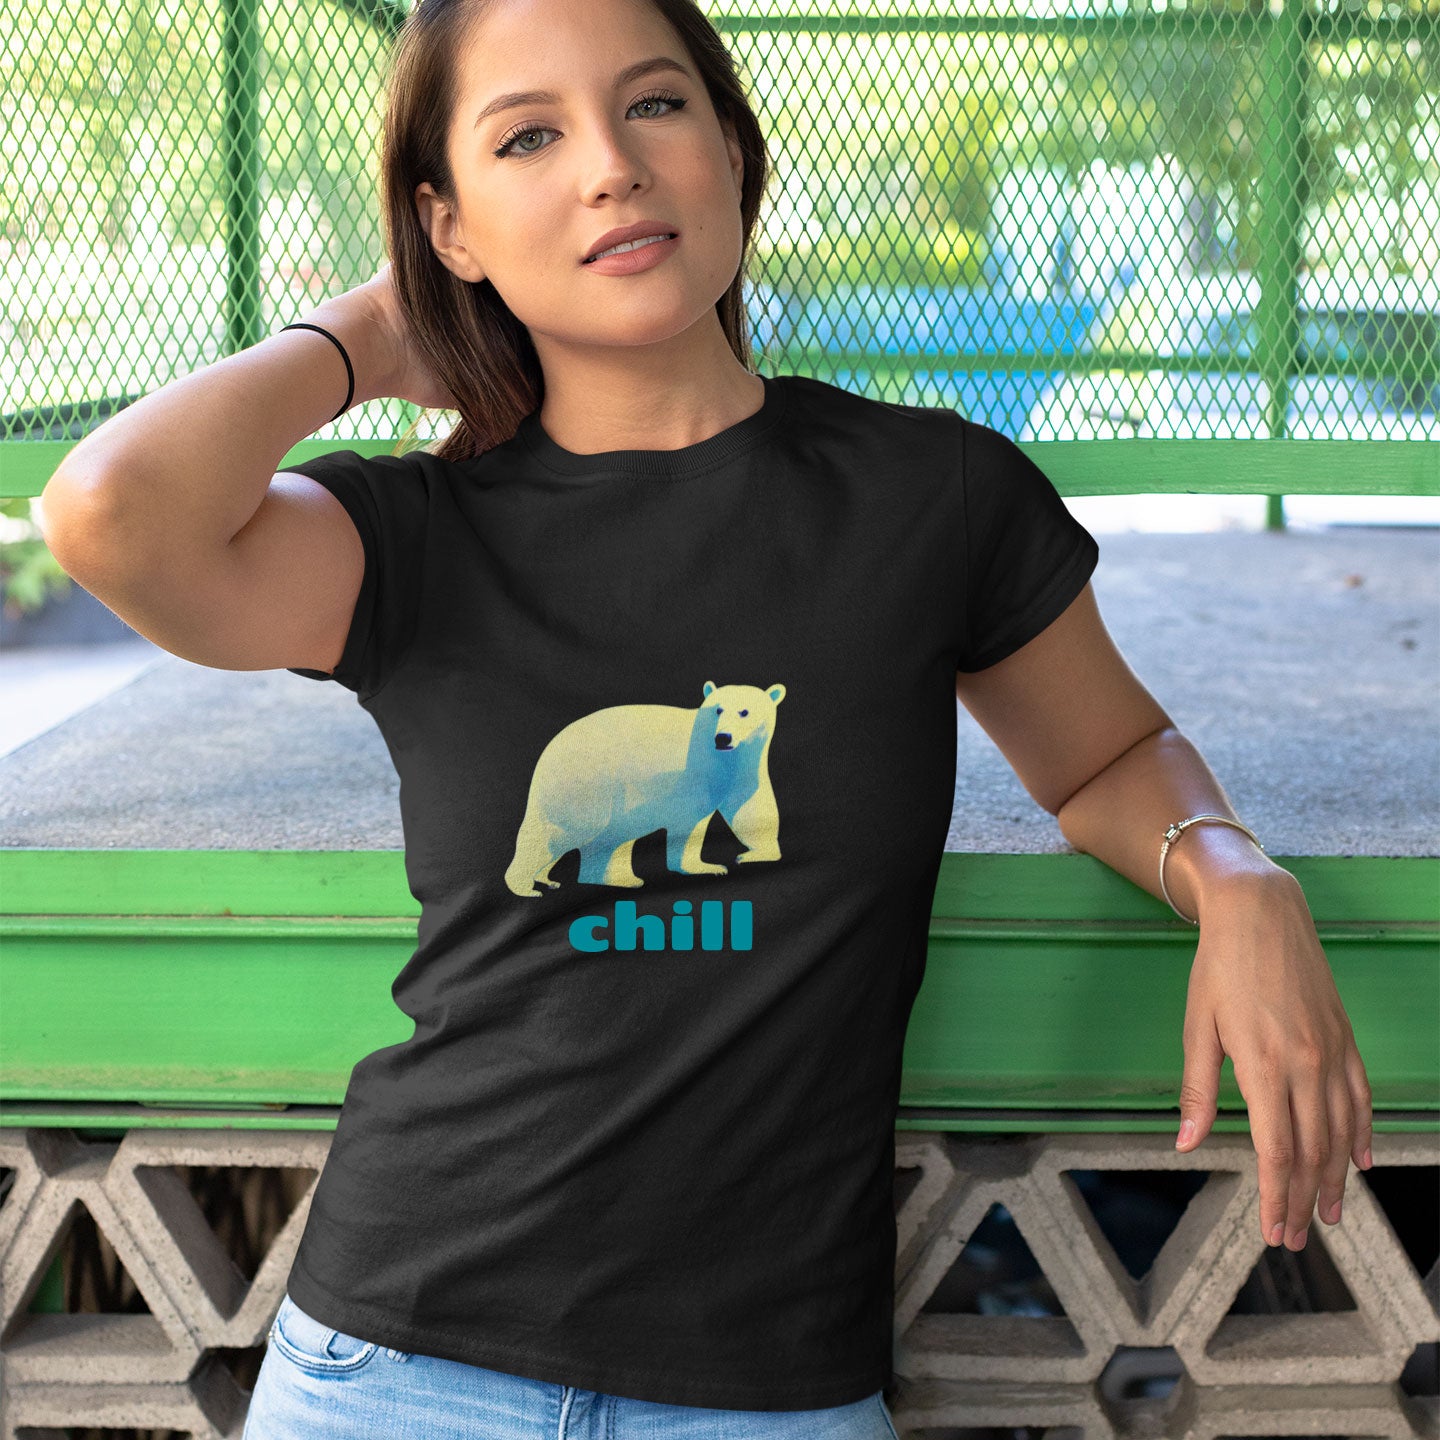 Woman wearing a black t-shirt with a polar bear print with chill caption